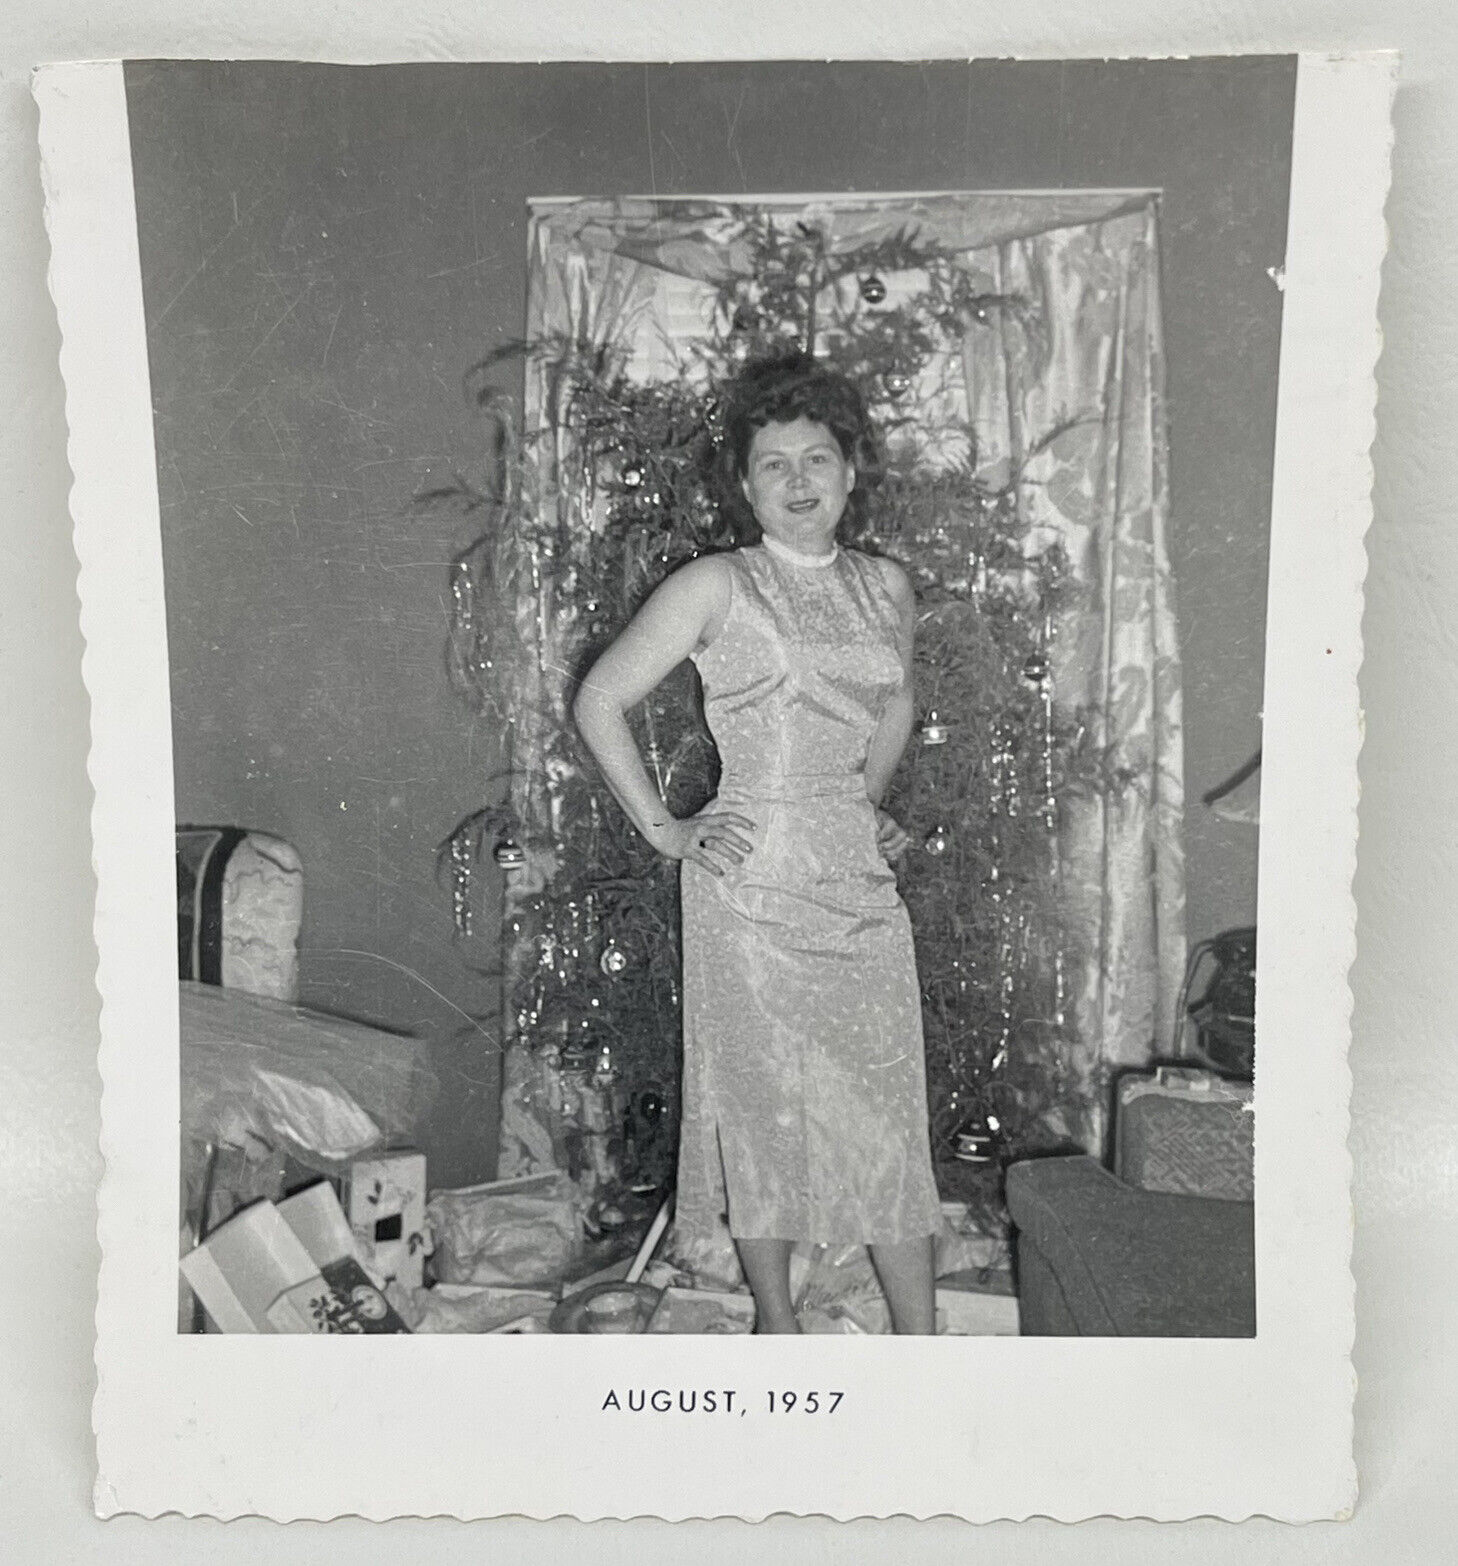 Vtg 1950s Found Photo Fashionable Woman Posed in Front of Christmas Tree